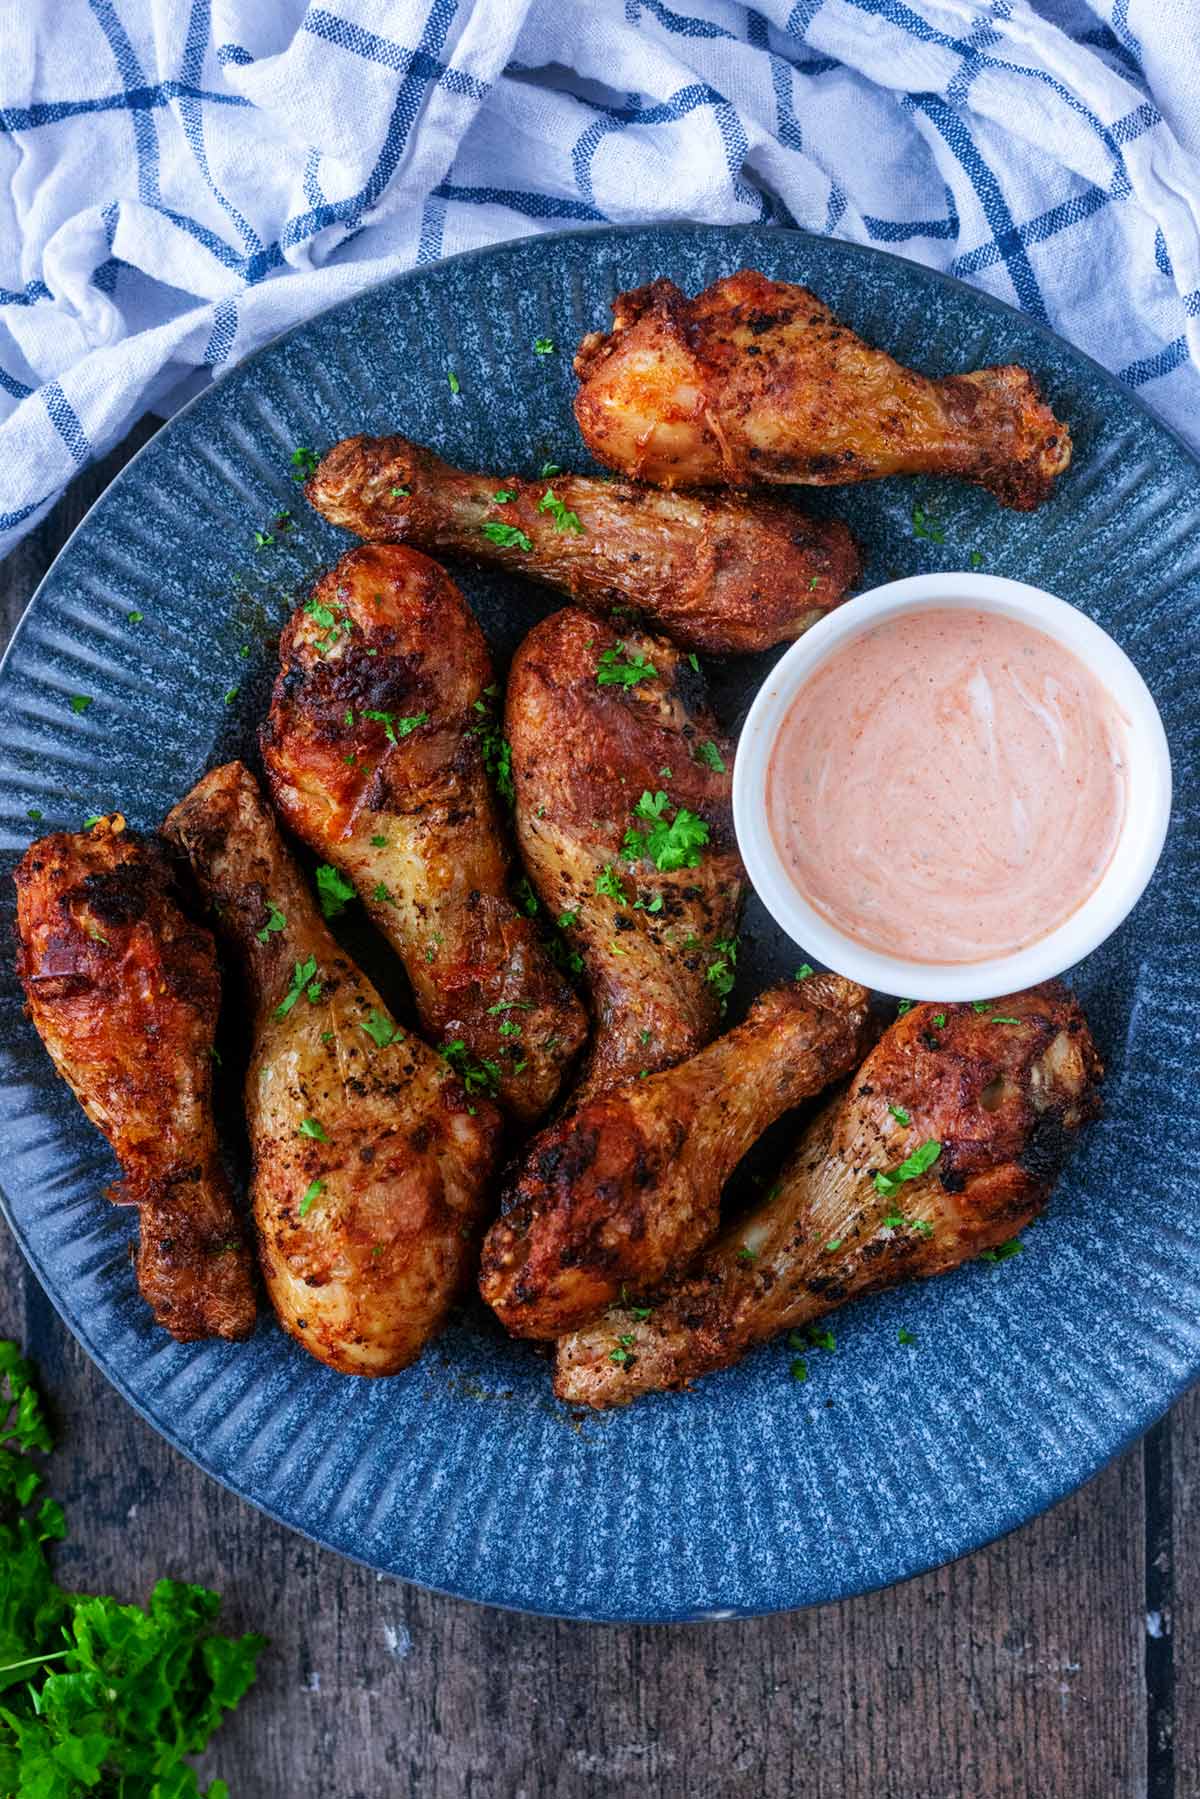 A plate of cooked chicken drumsticks with a pot creamy sauce.